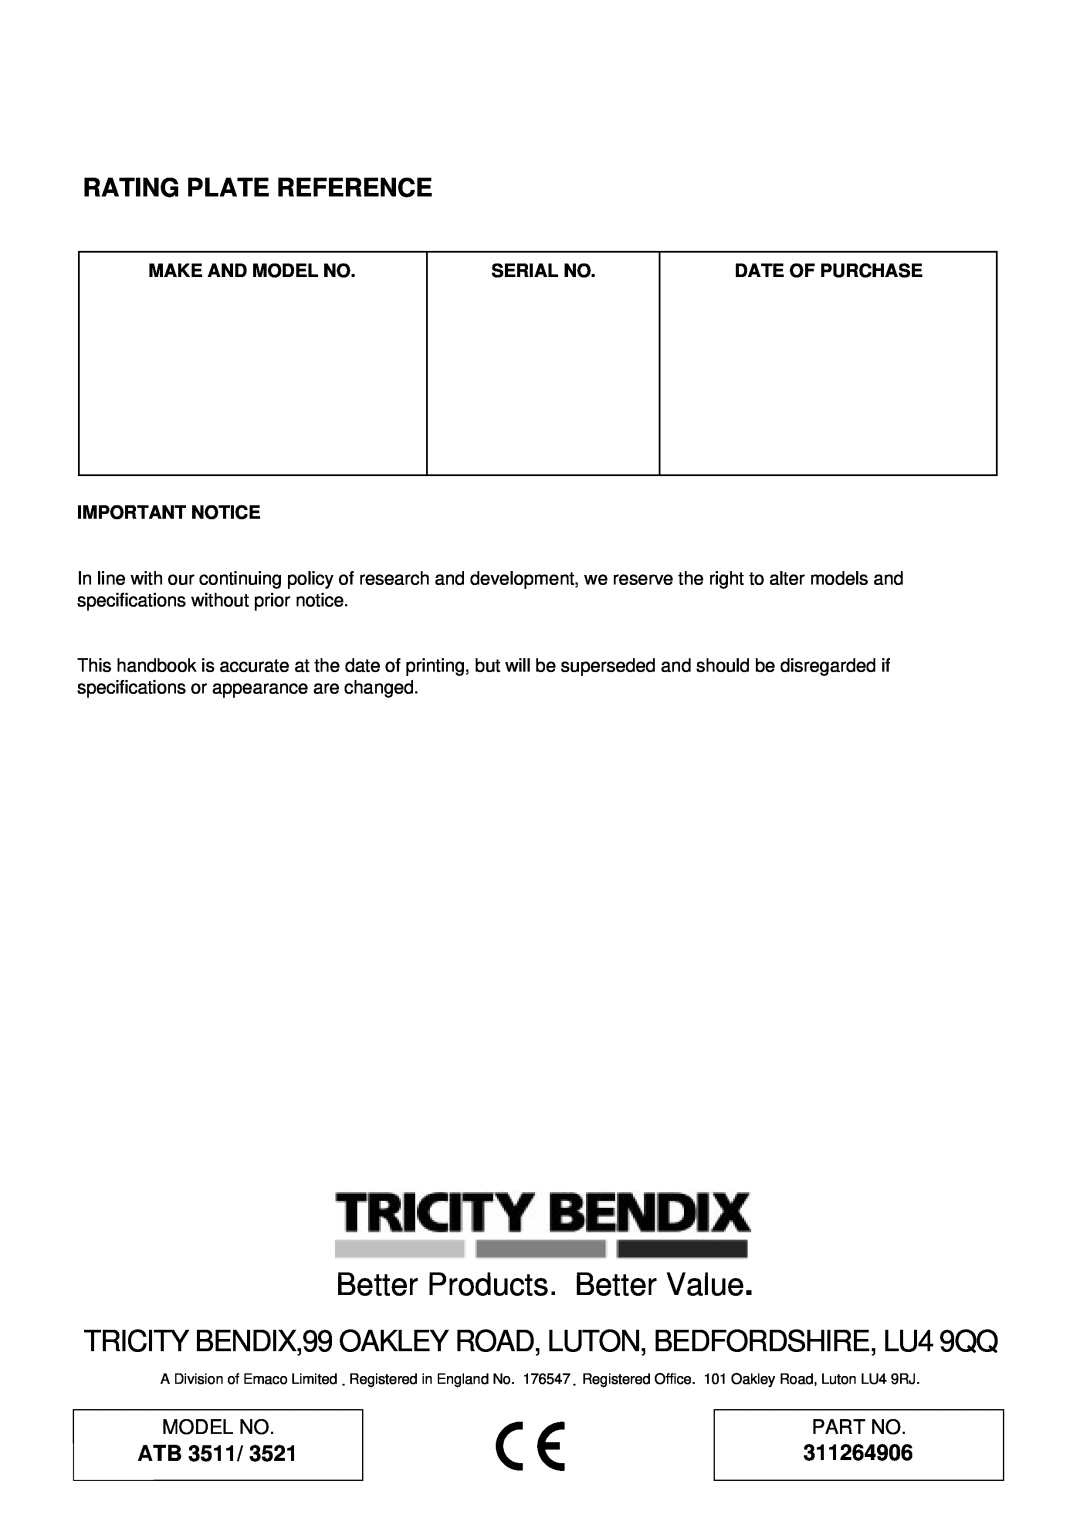 Tricity Bendix SURREY Rating Plate Reference, Atb, 311264906, Better Products. Better Value, Make And Model No 